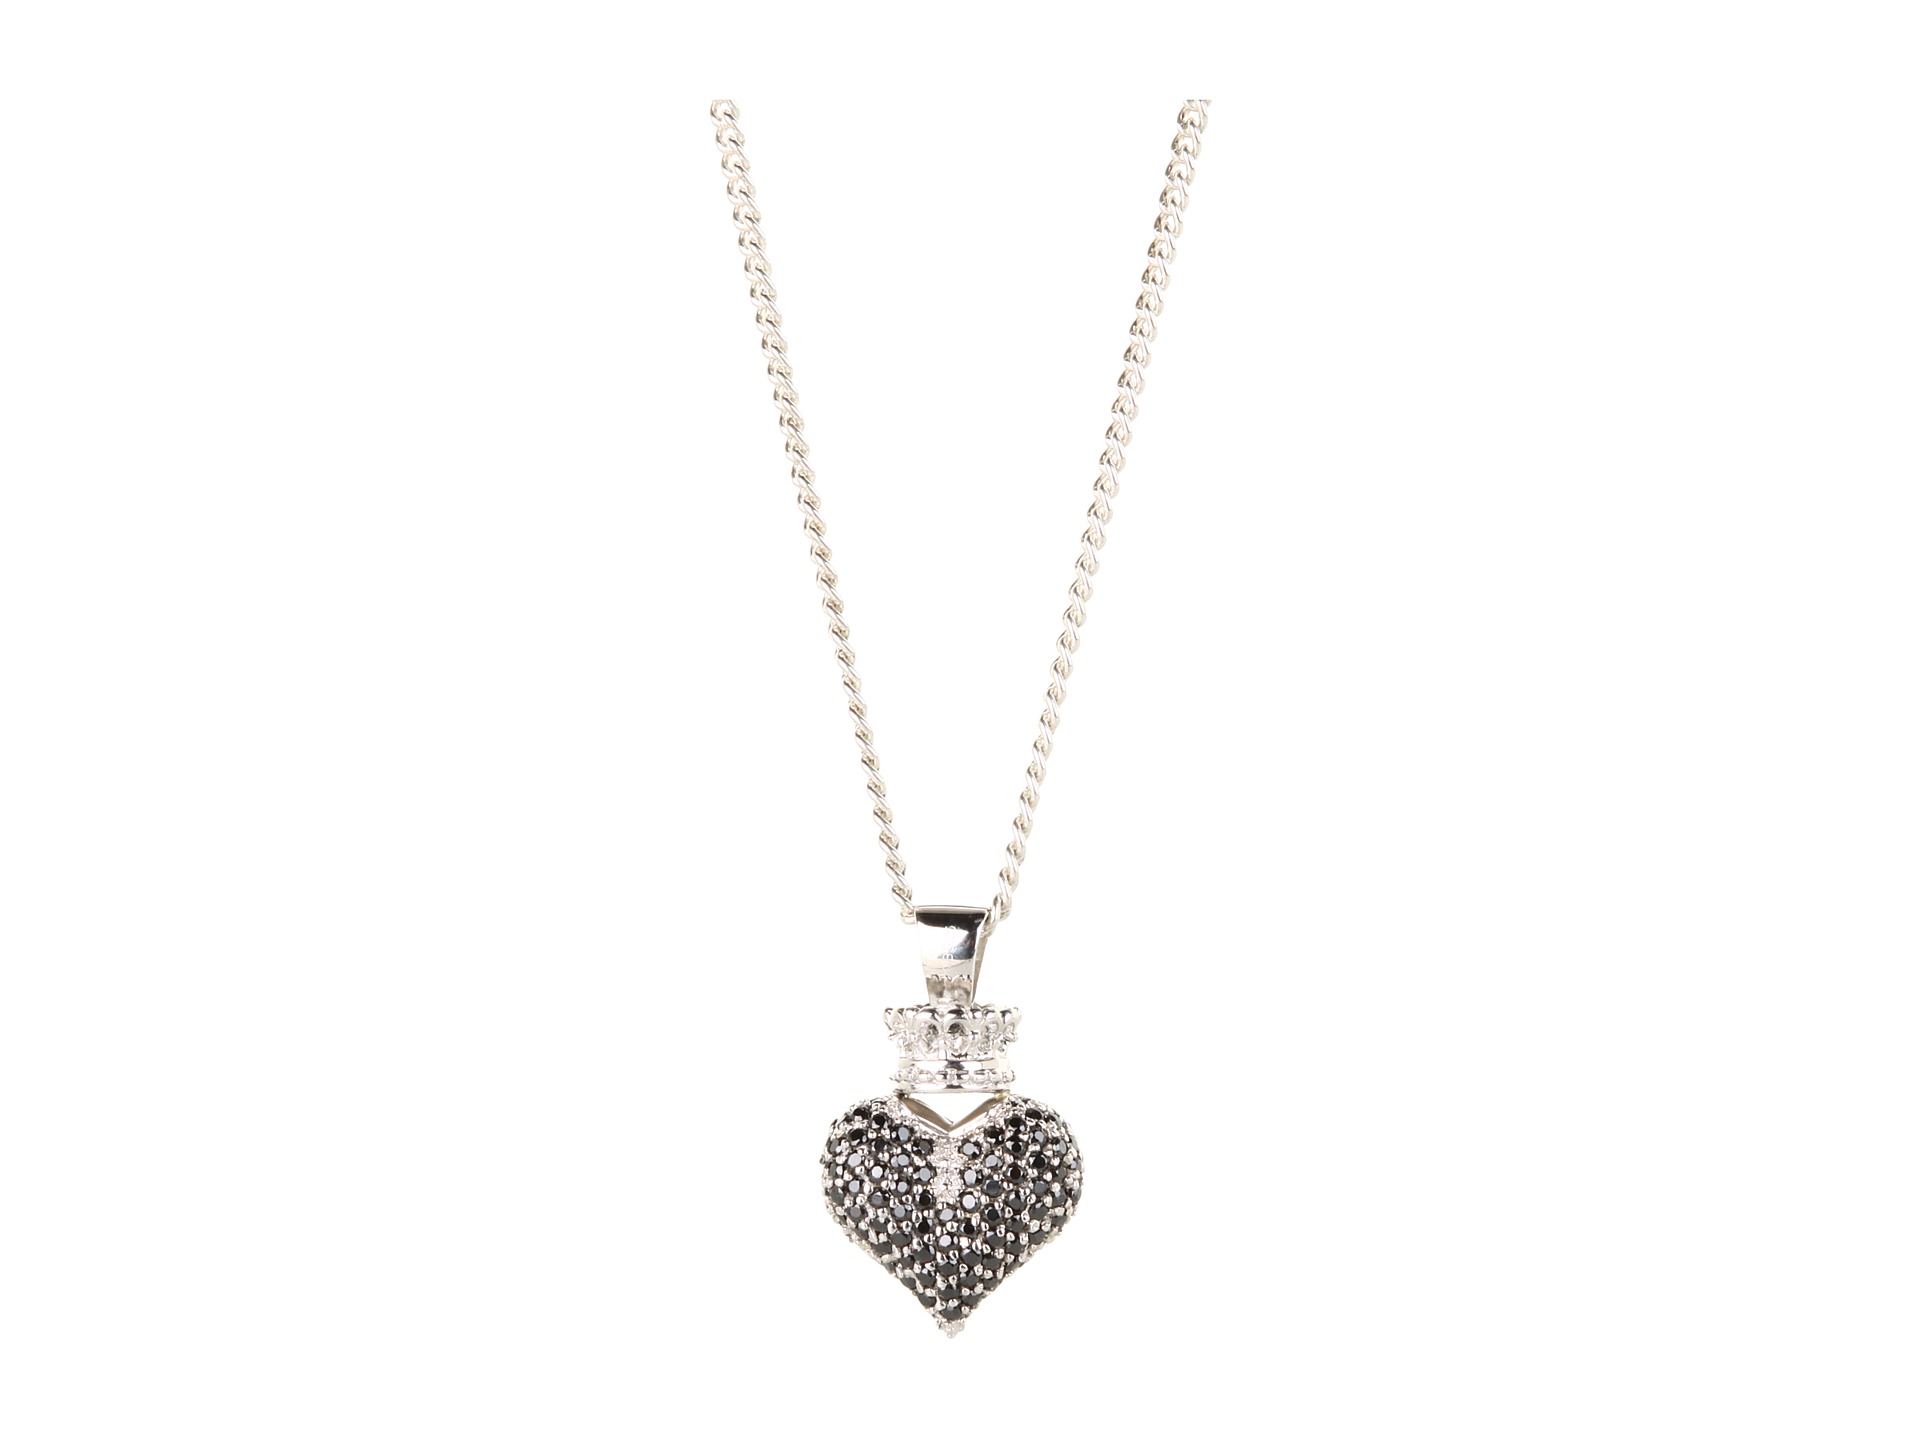 pave crowned heart on onyx bead necklace $ 230 00